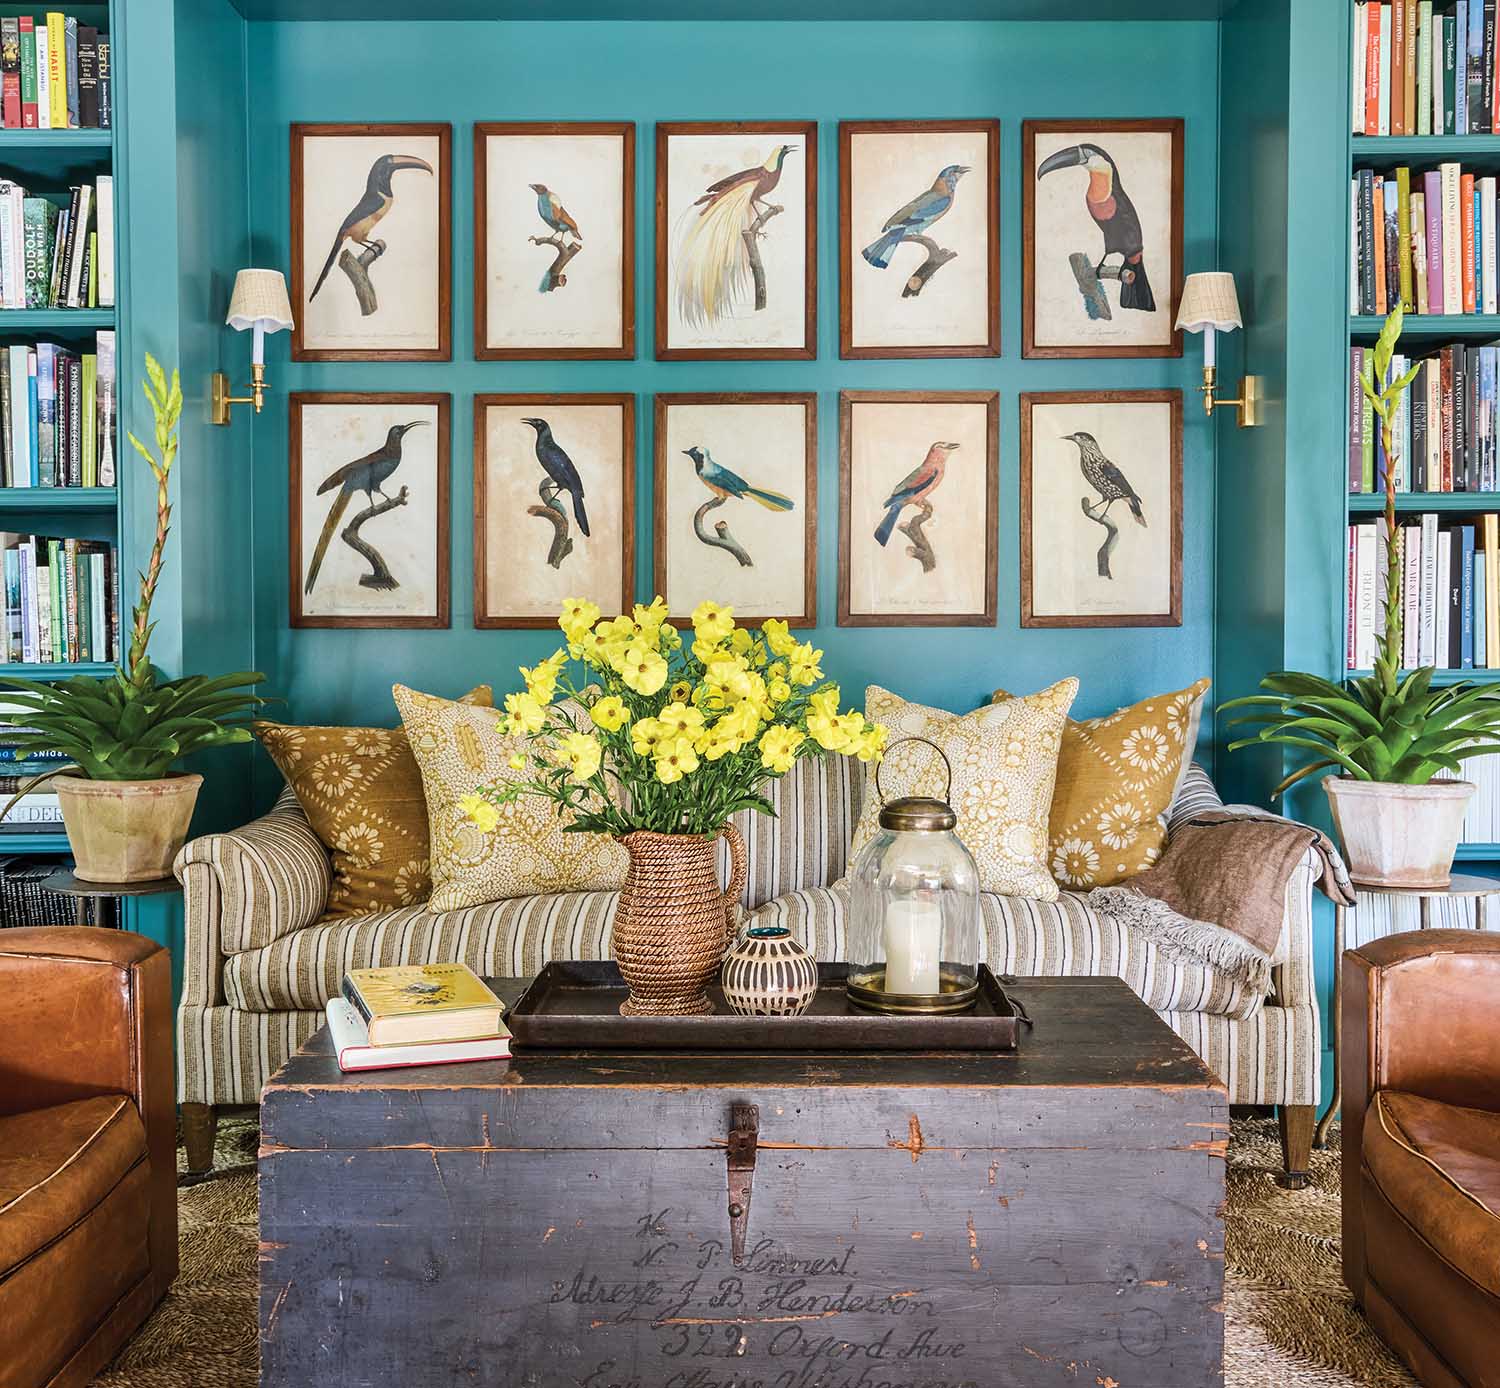 Bird prints cover a teal wall.